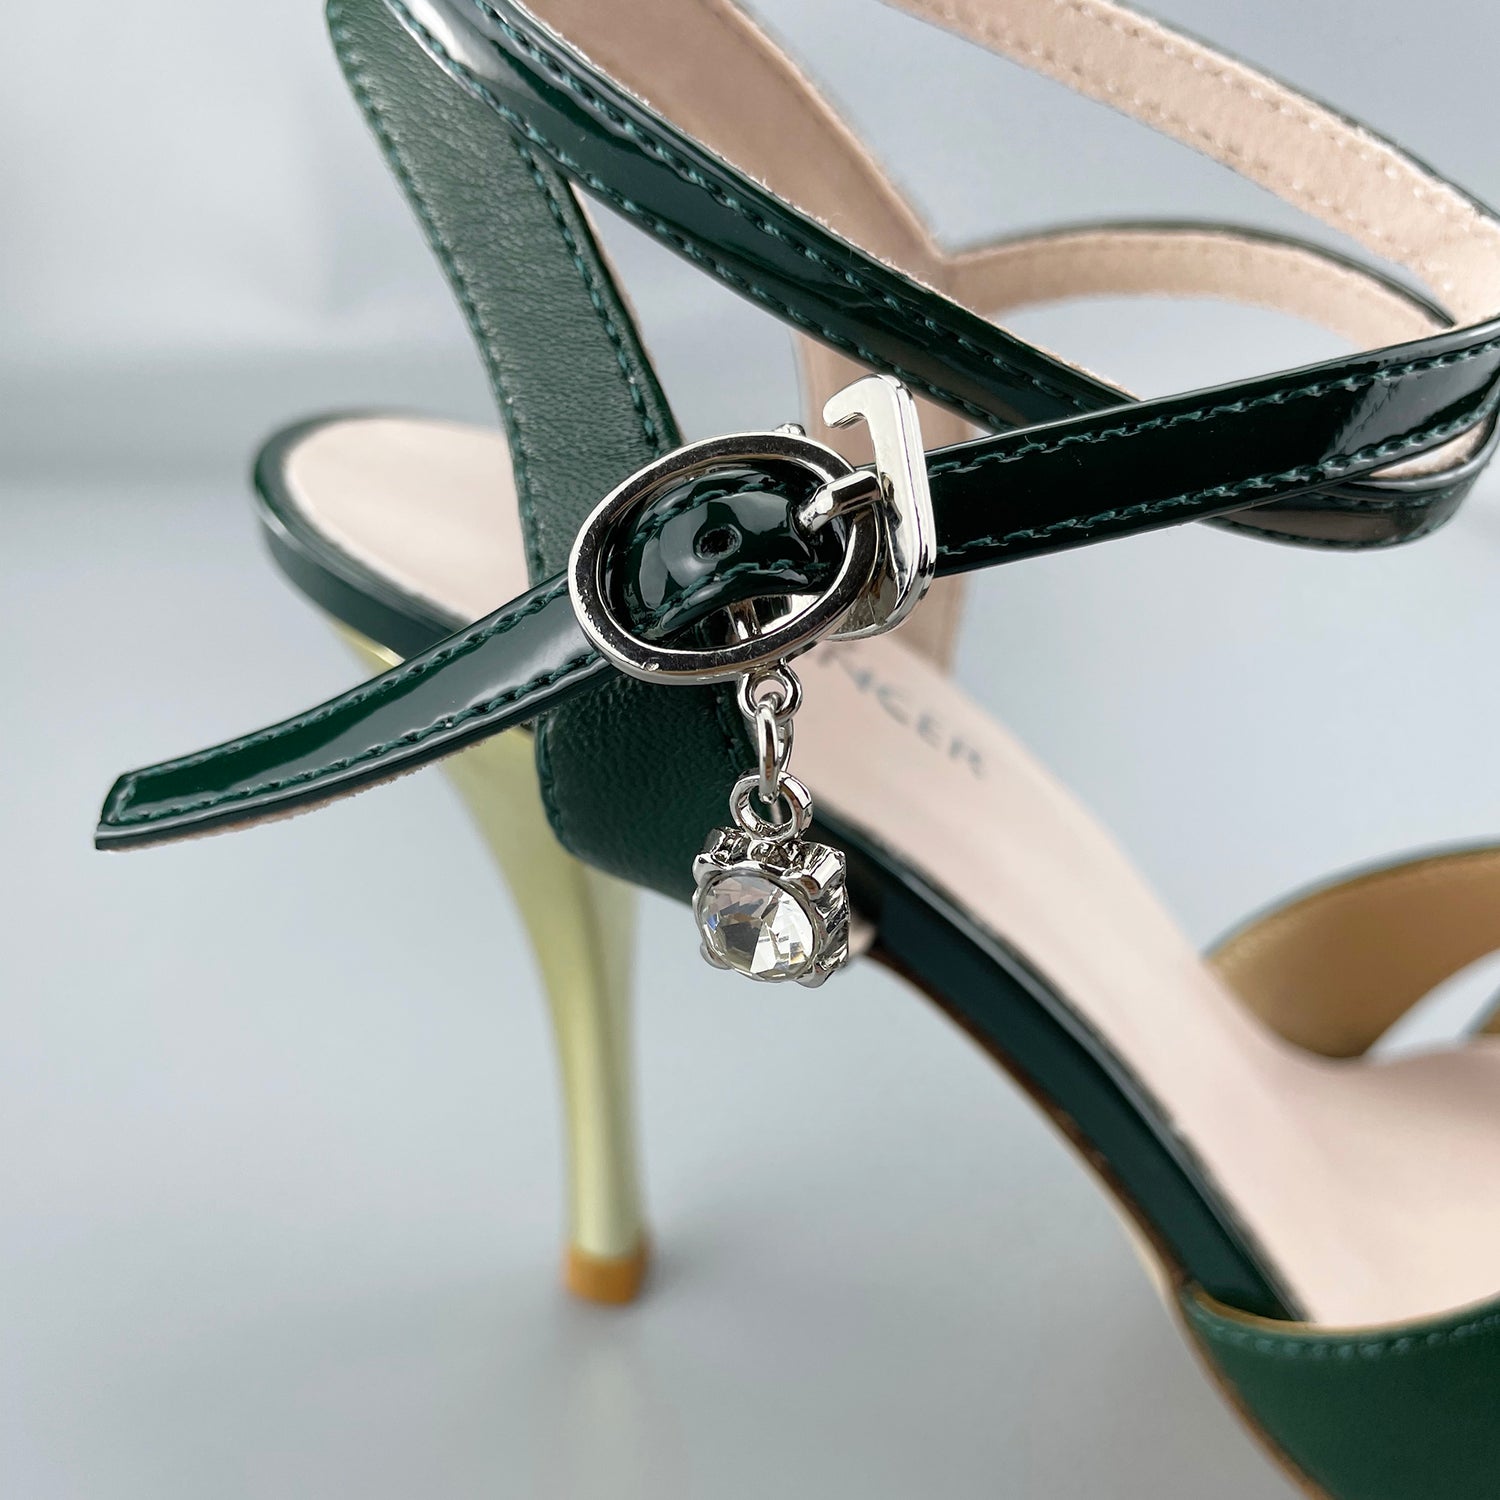 Pro Dancer Green Peep-toe Argentine Tango Shoes with Closed-back High Heels and Hard Leather Sole7